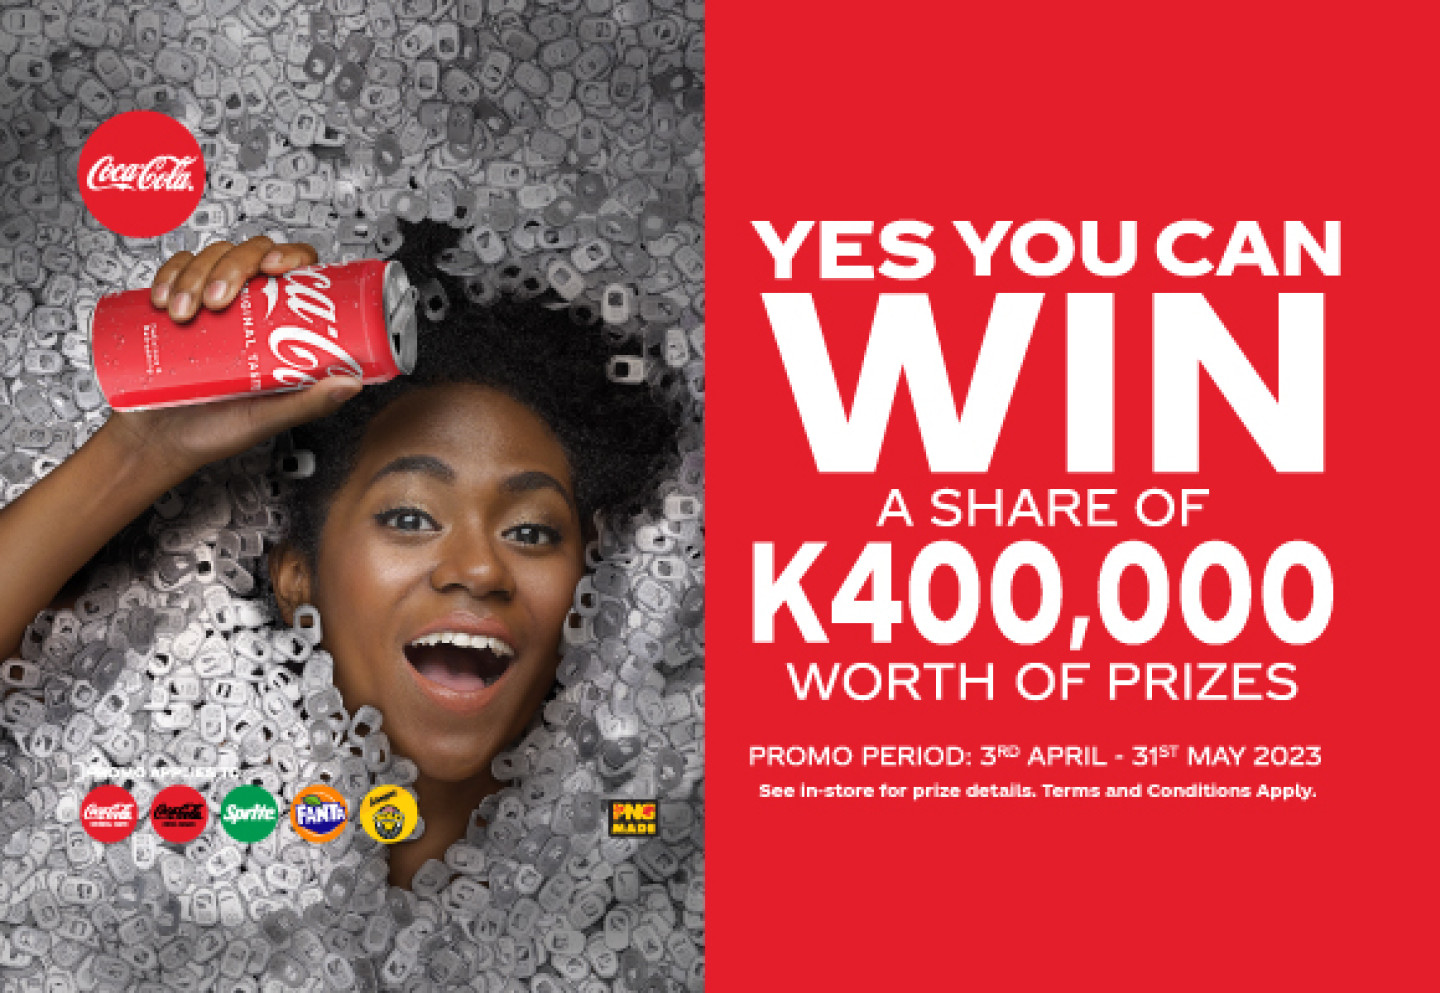 5. Coca-Cola Promotions at Farmfoods - wide 2